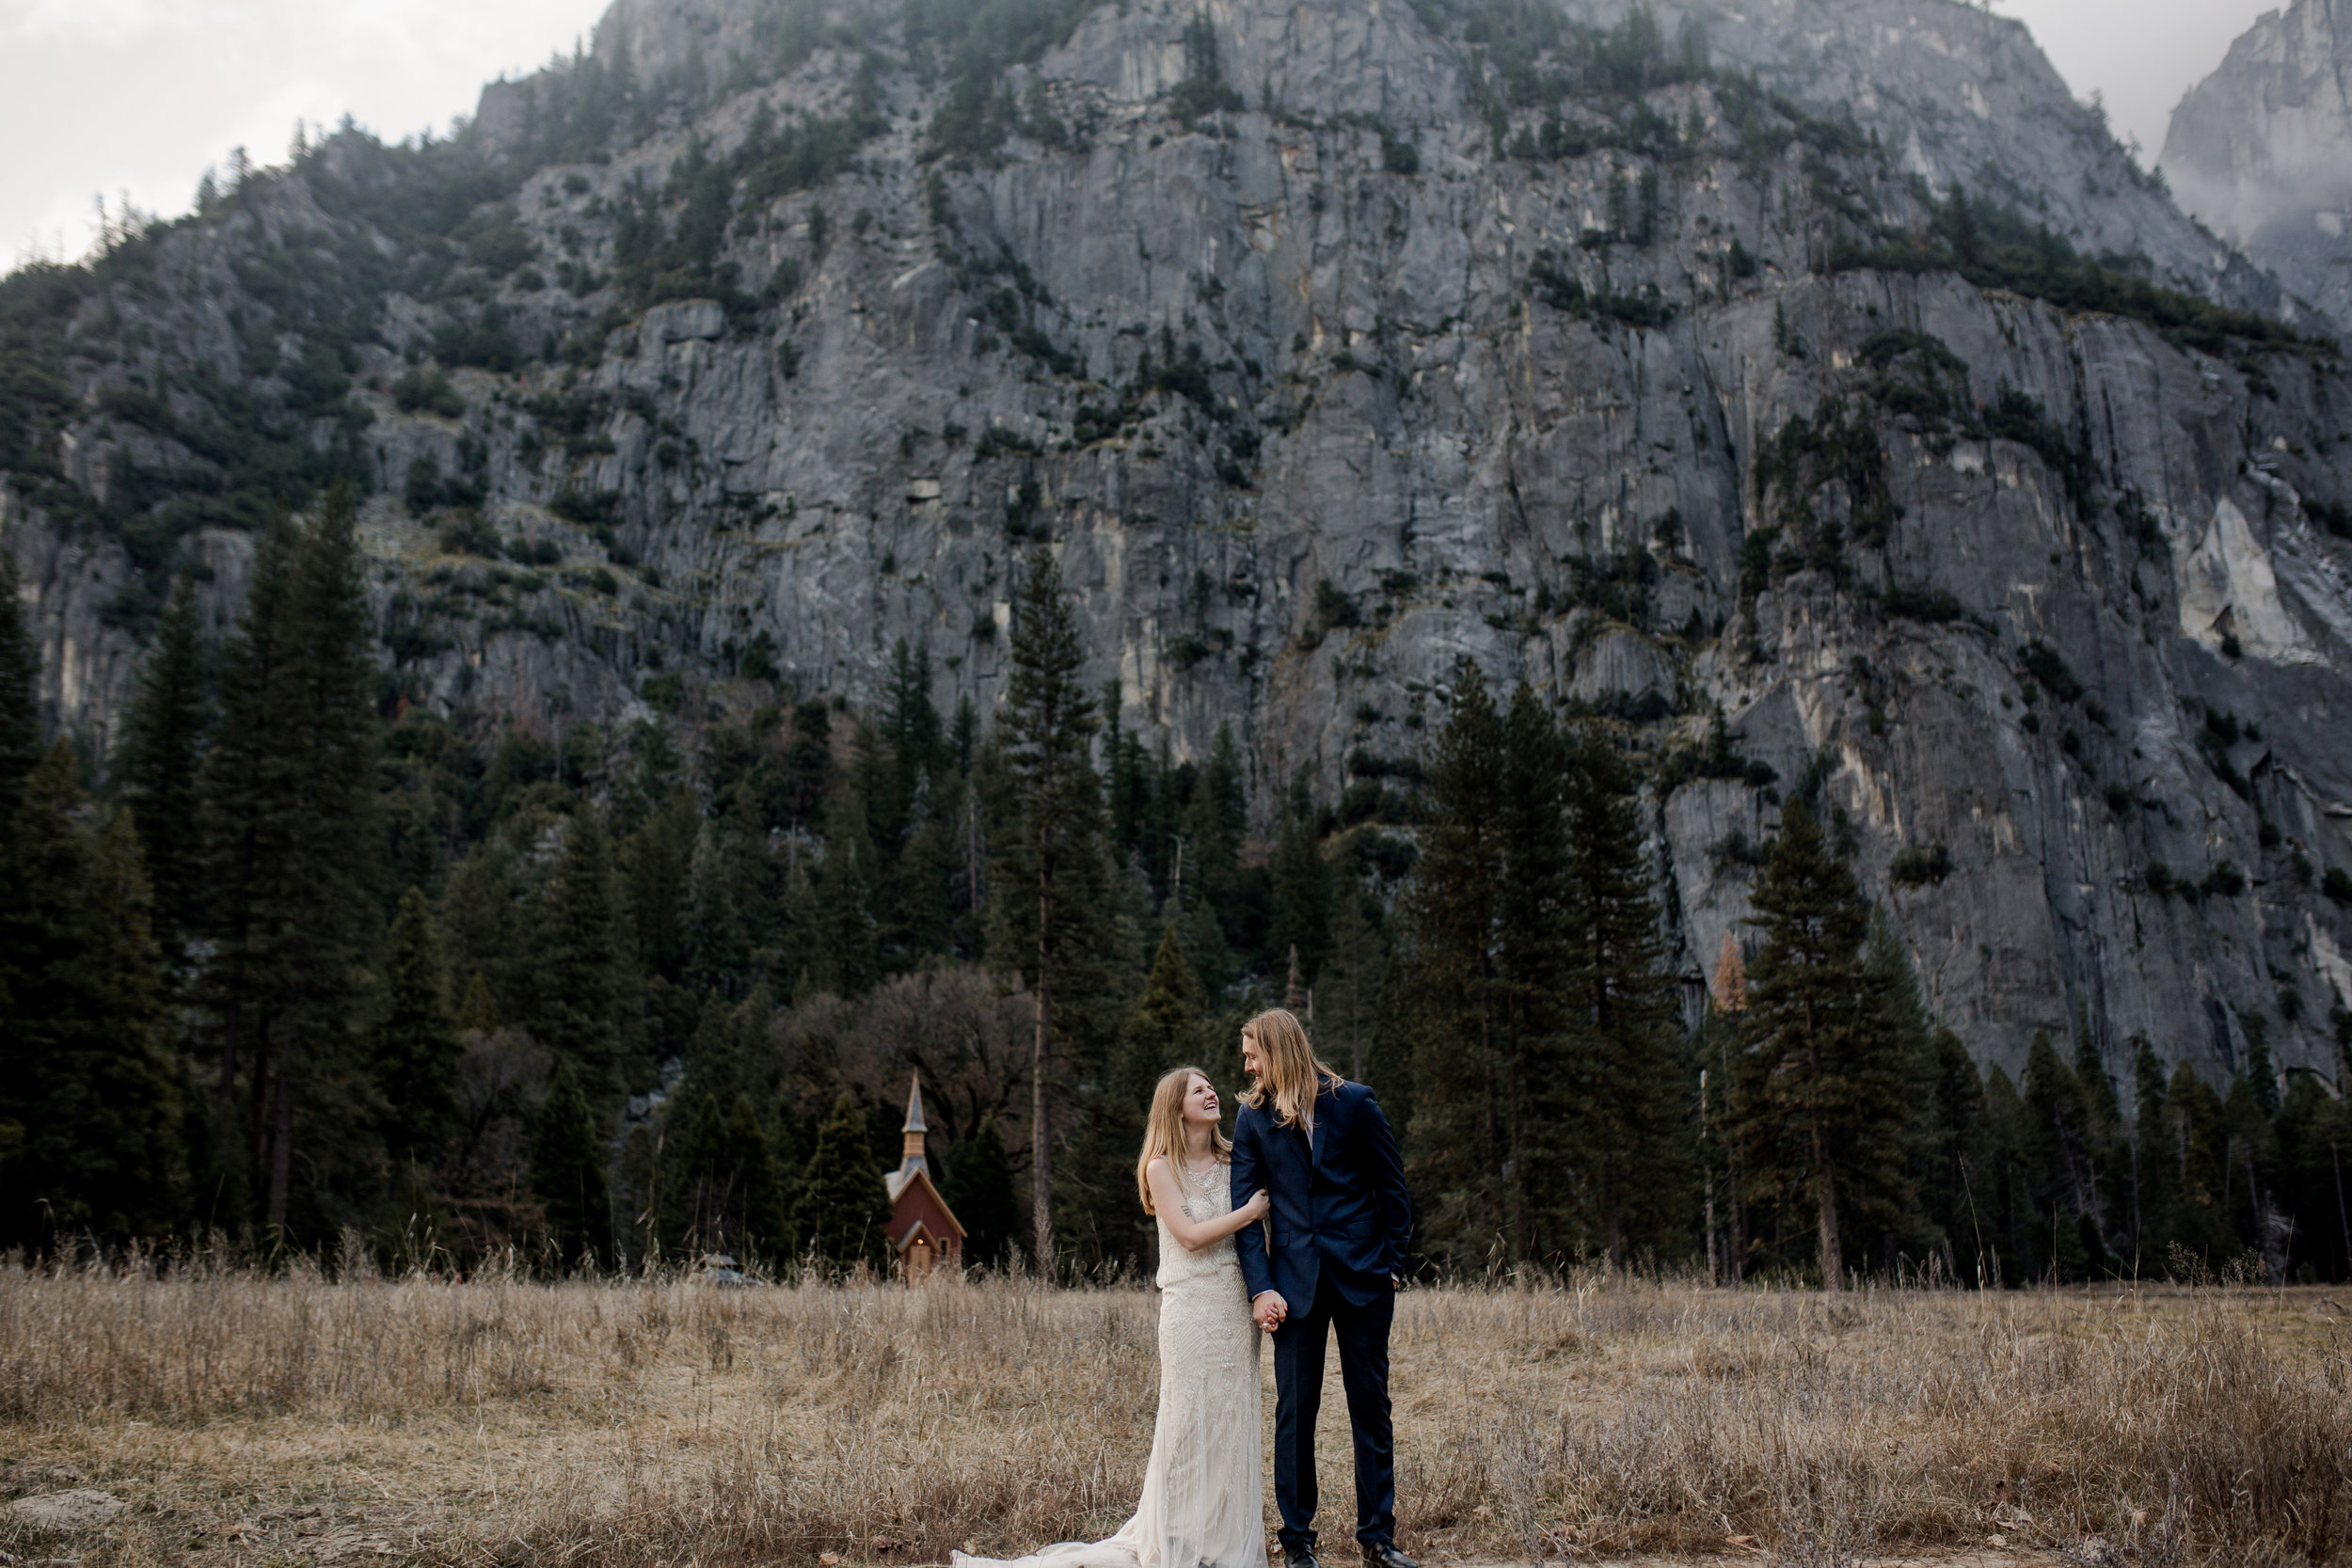 nicole-daacke-photography-yousemite-national-park-elopement-photographer-winter-cloud-moody-elope-inspiration-yosemite-valley-tunnel-view-winter-cloud-fog-weather-wedding-photos-62.jpg